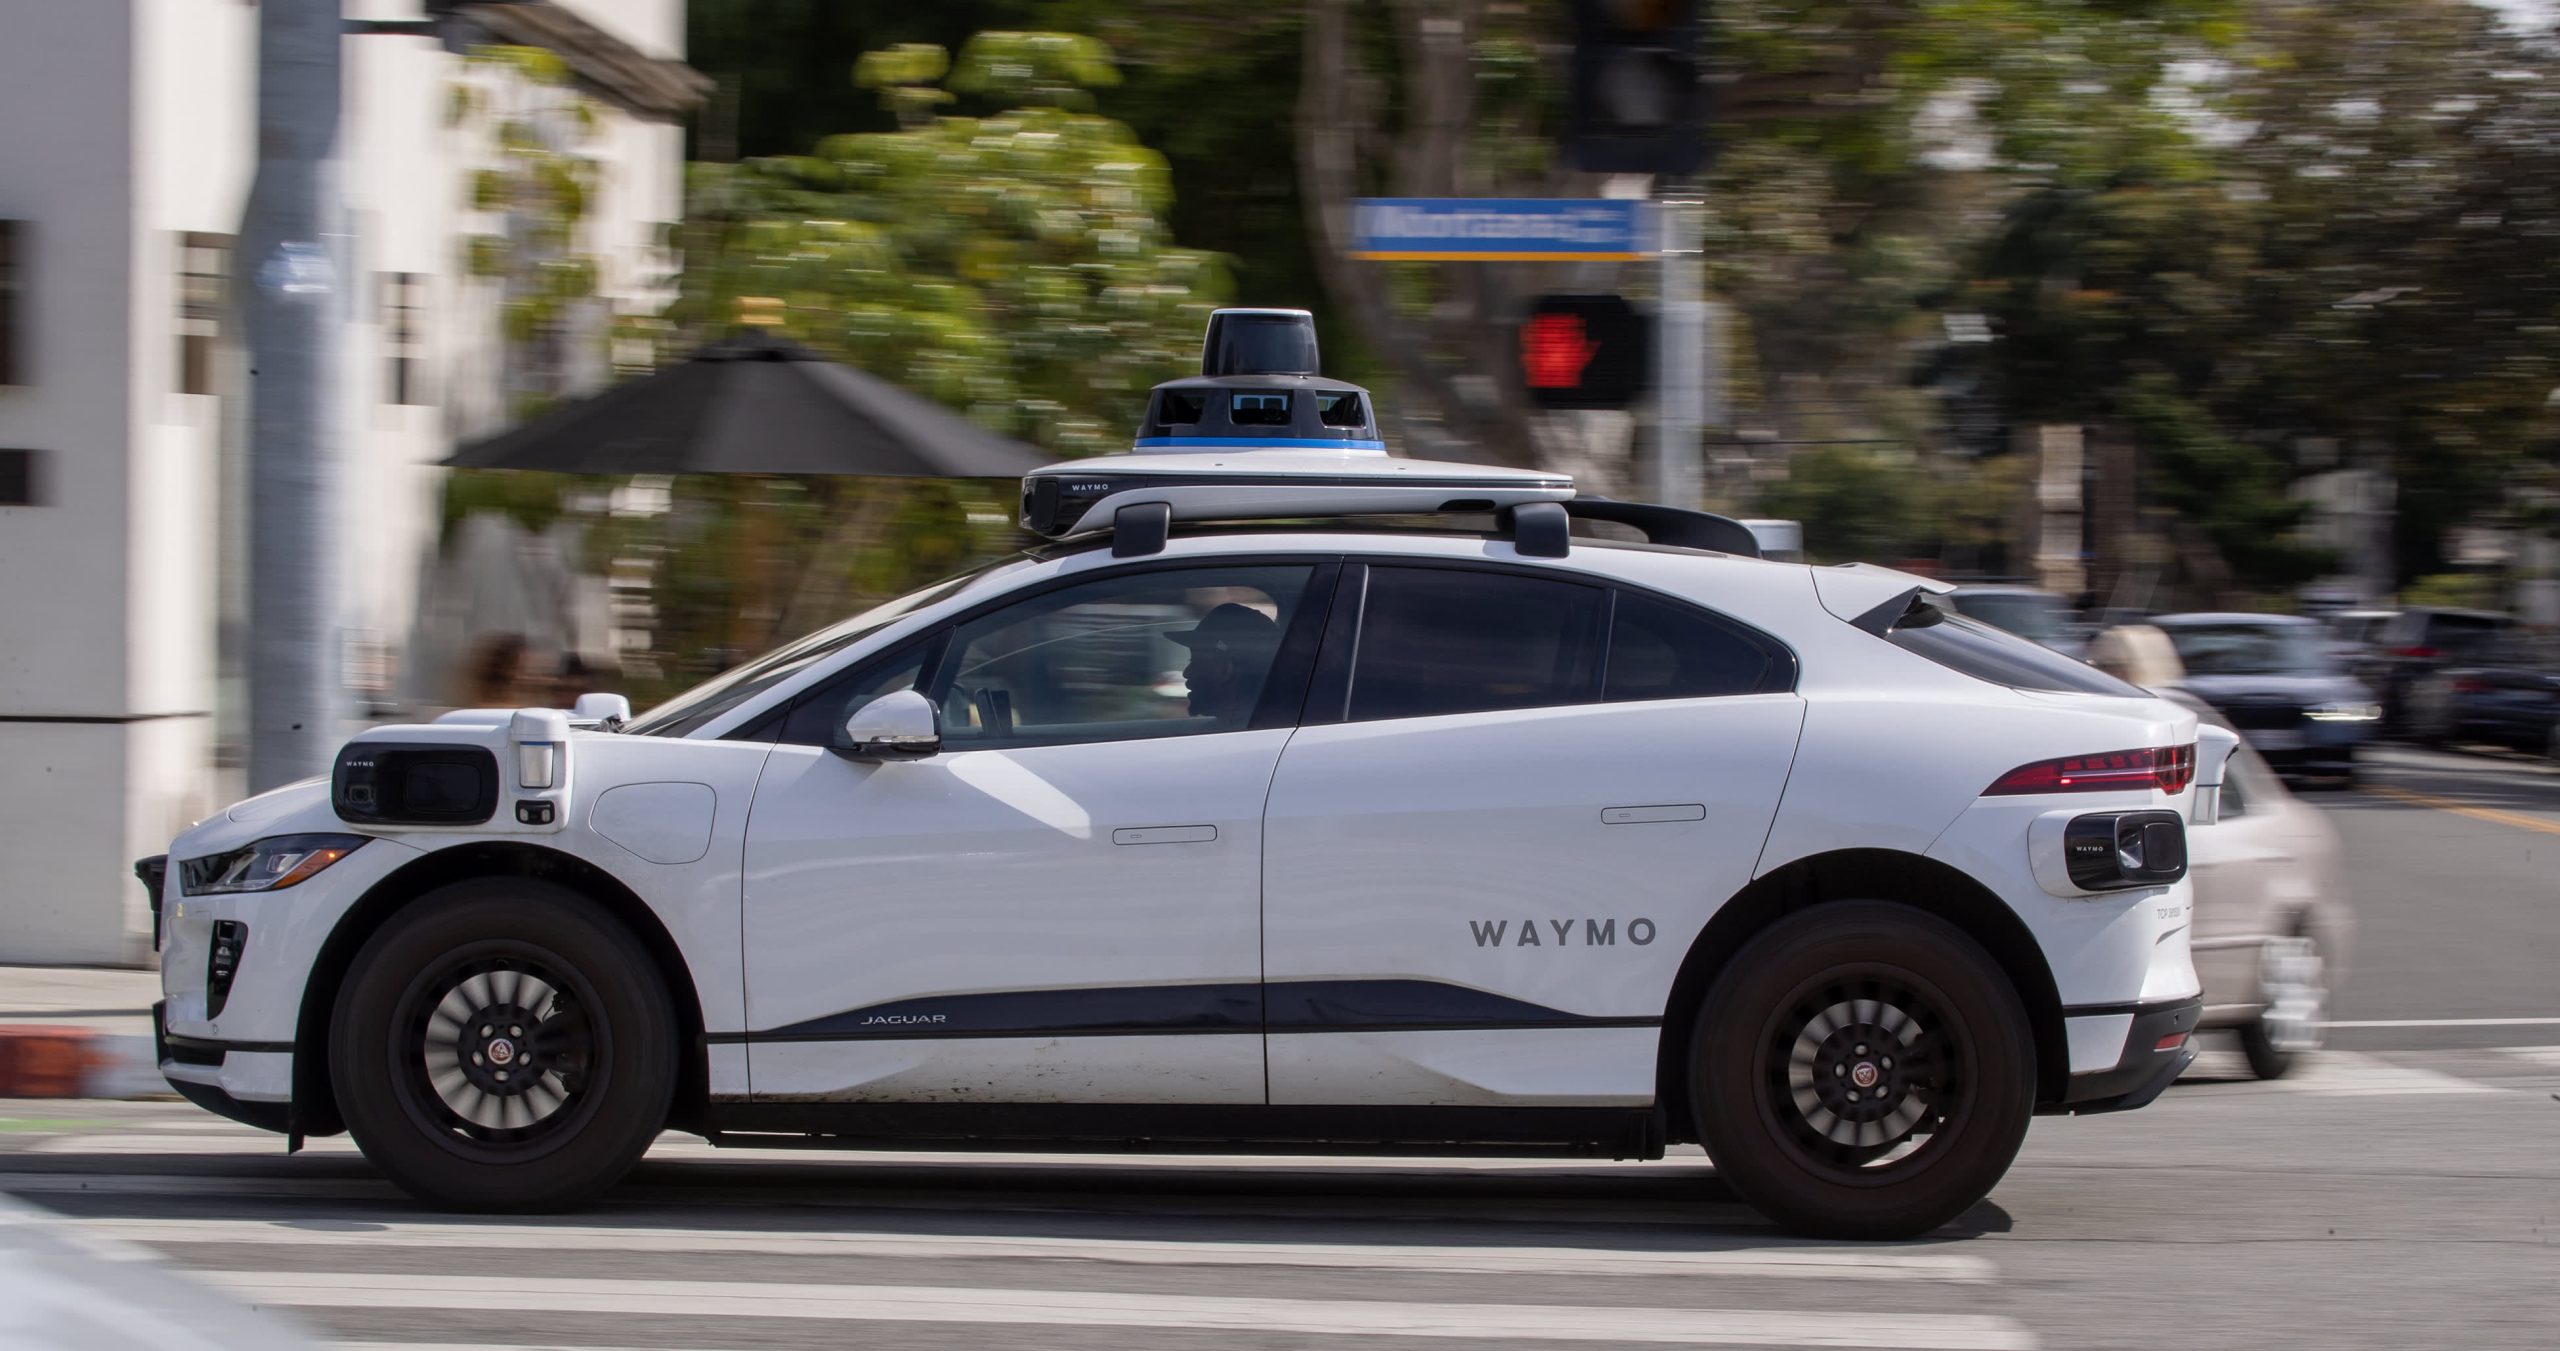 Waymo gains approval to expand driverless robotaxi services (Credits: CNBC)